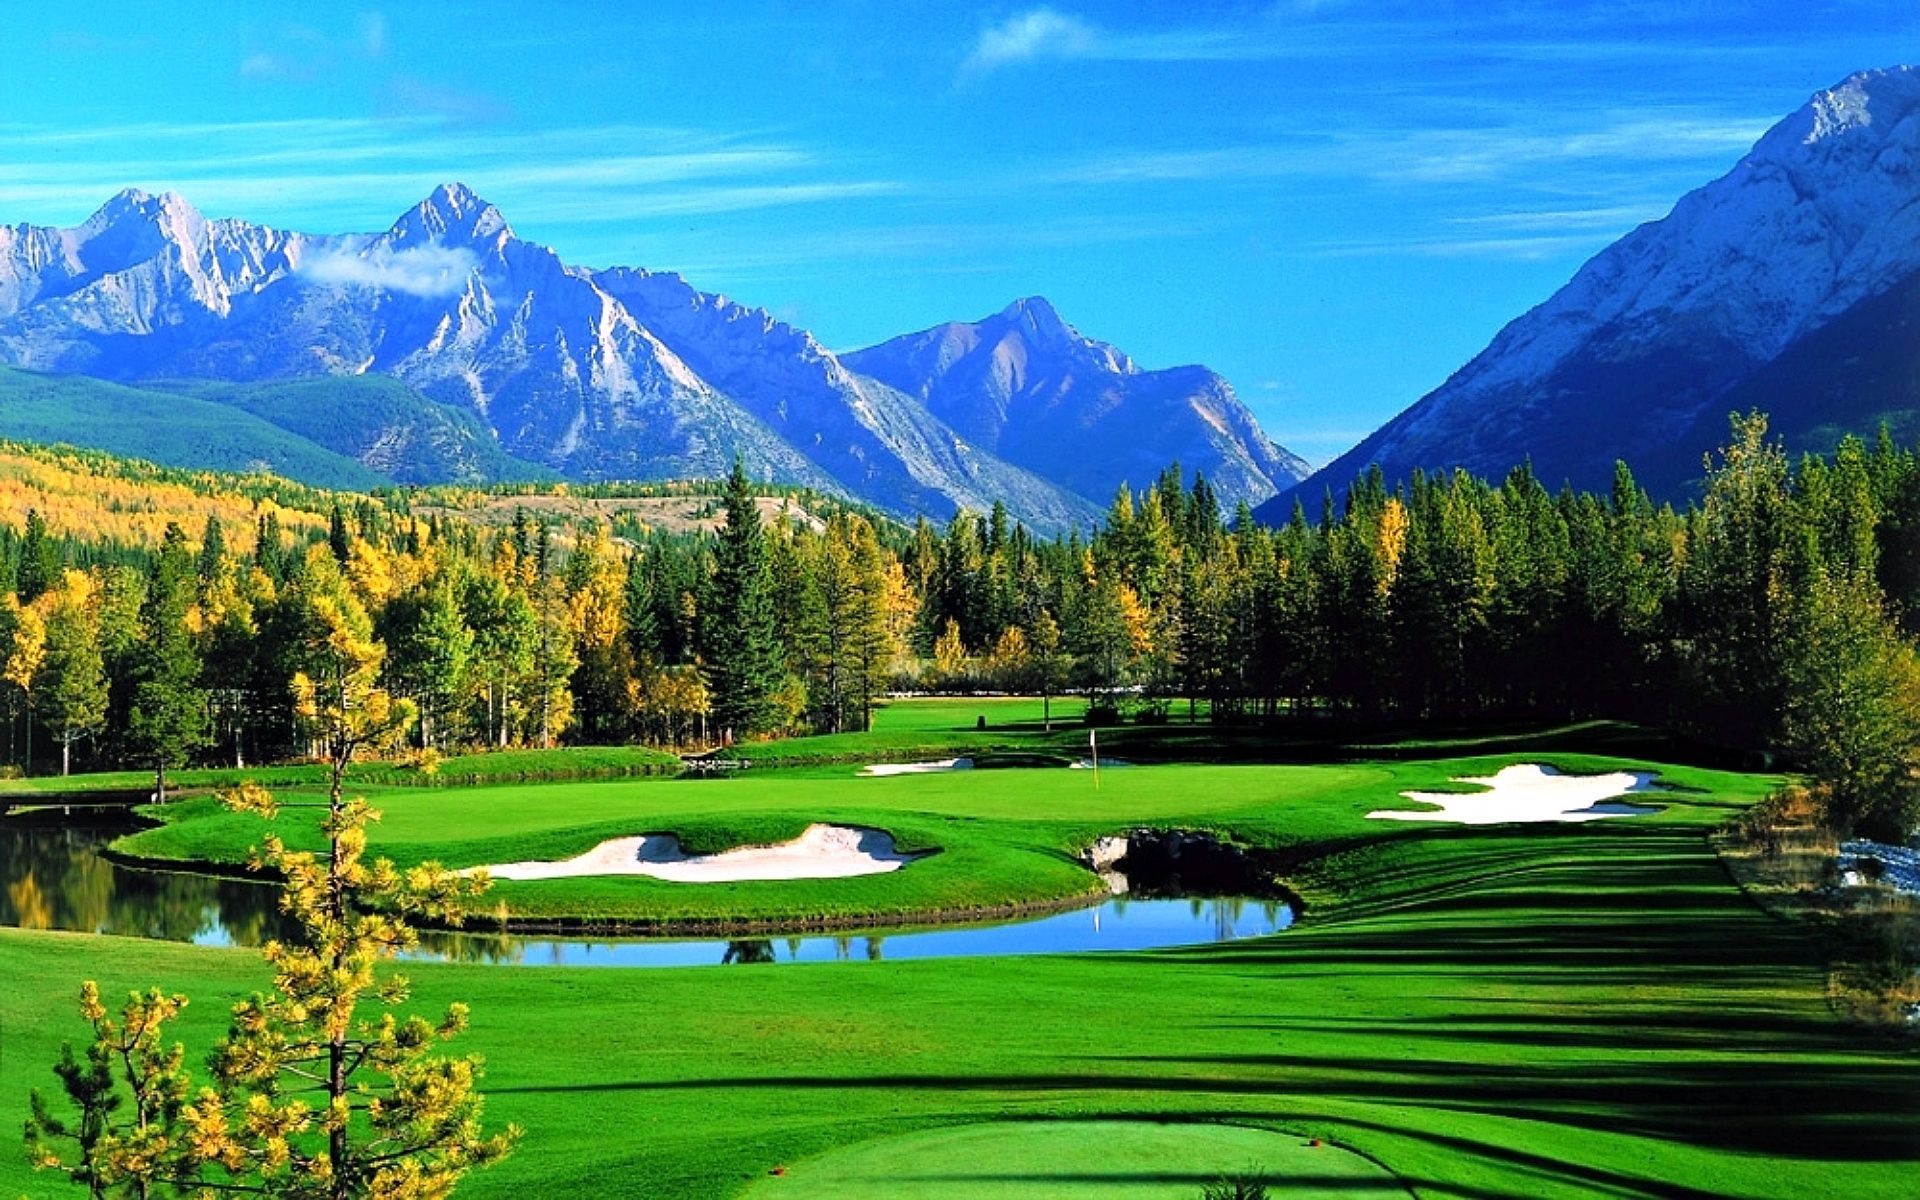 Scenic Golf Course Wallpaper At Wallpaperbro